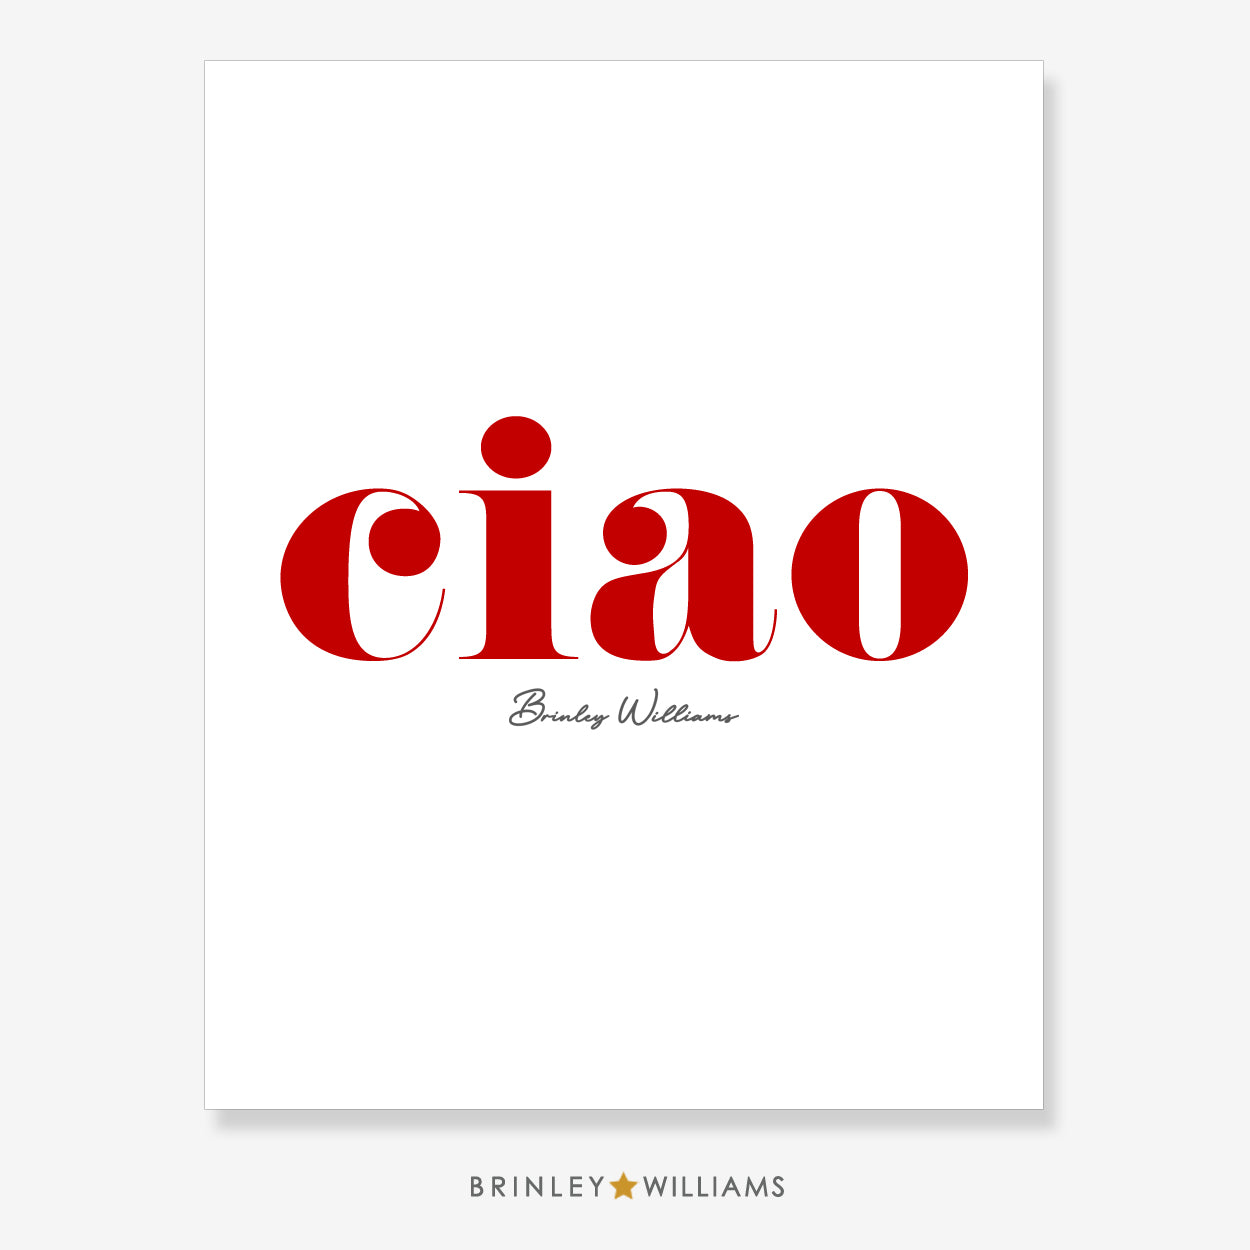 Ciao Wall Art Poster - Red